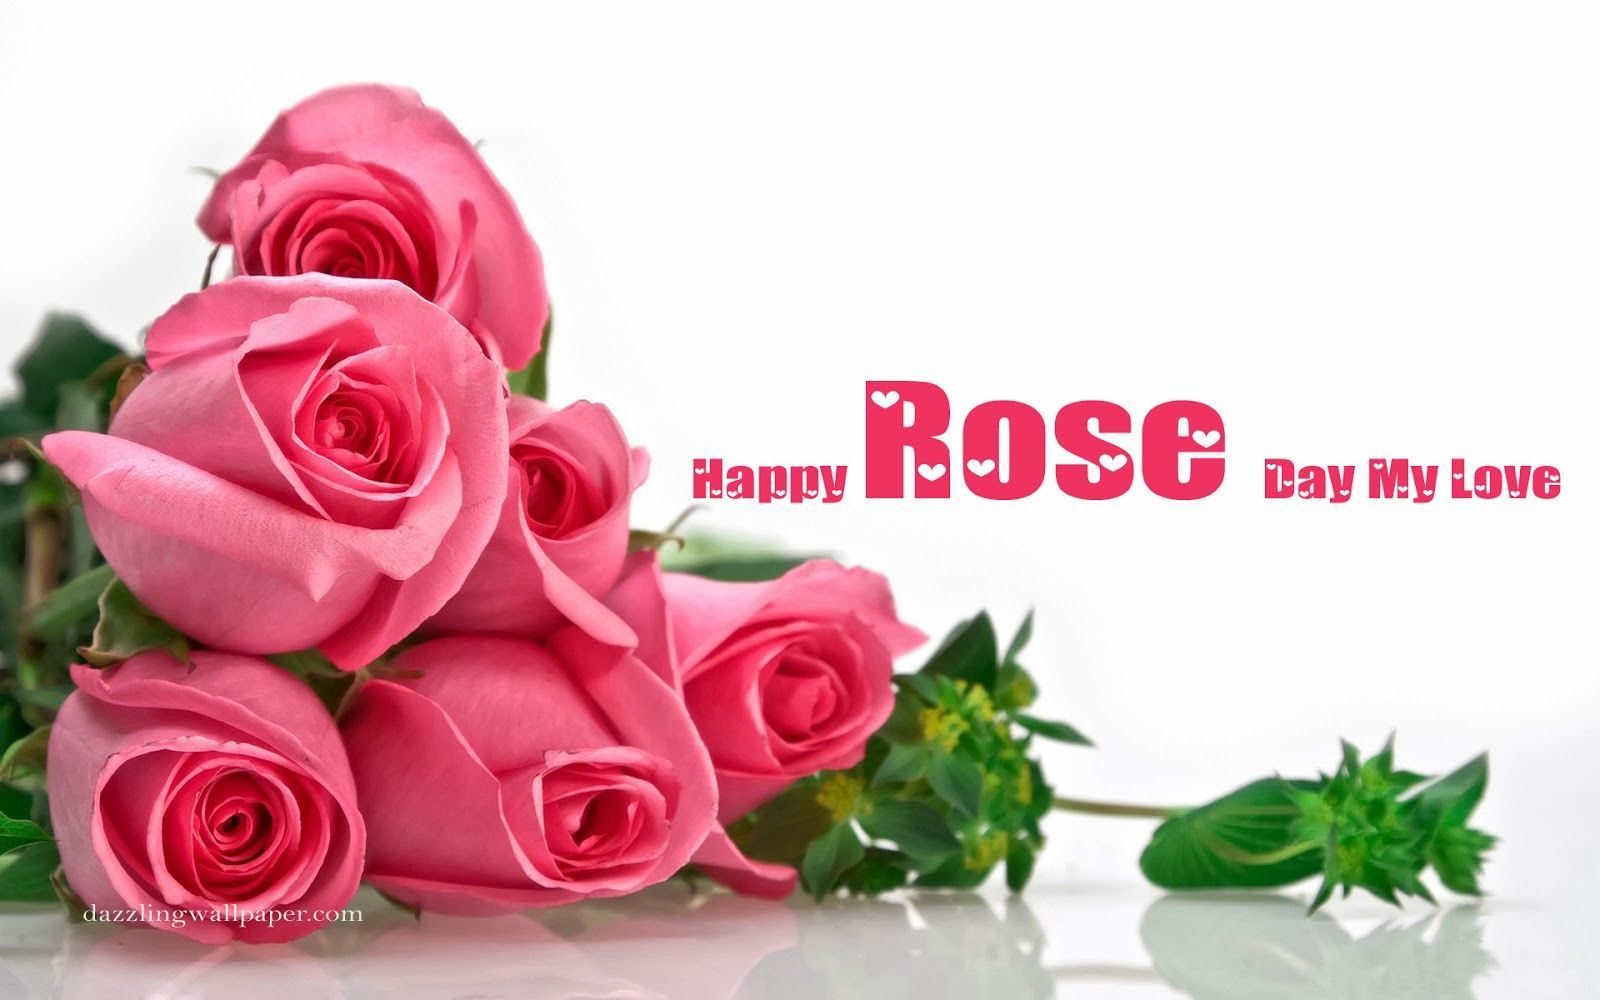 Rose Day Special HD Wallpaper. Get Well Soon Flowers, I Miss You Wallpaper, Rose Day Wallpaper